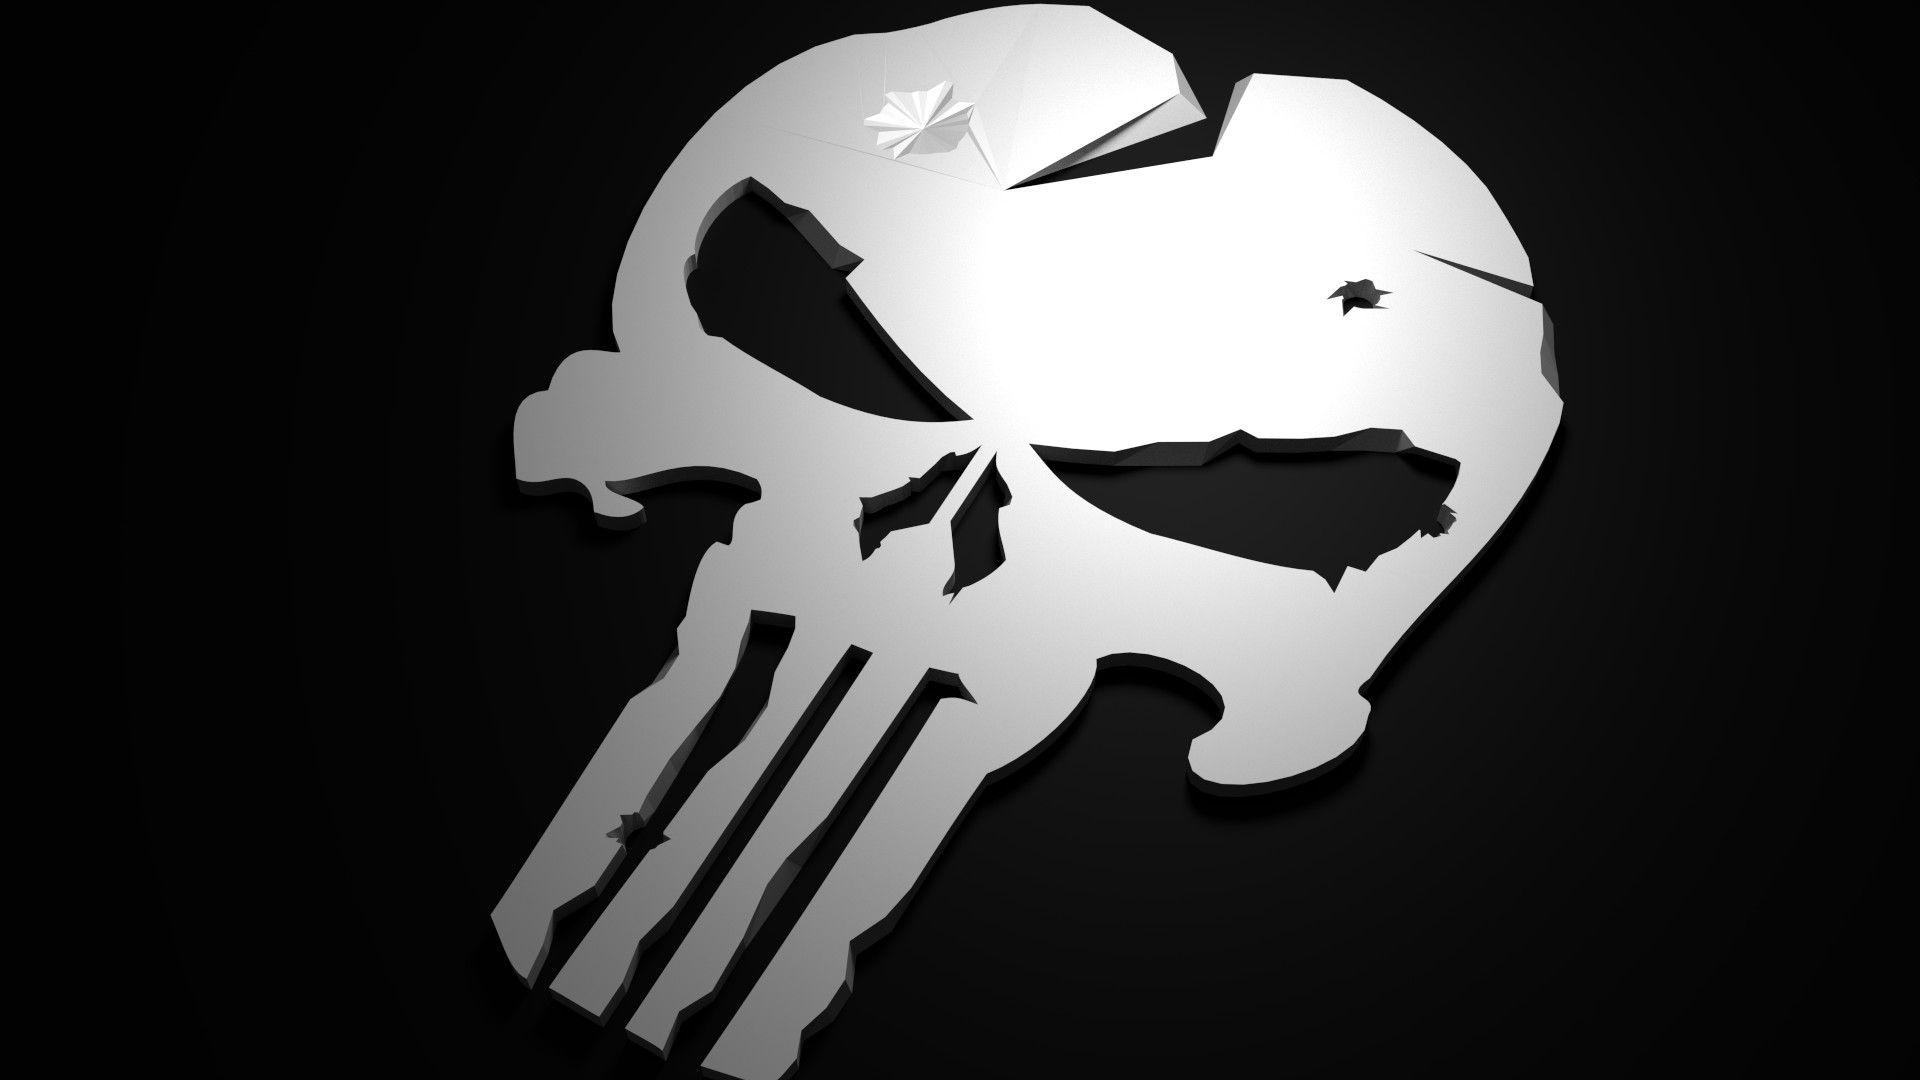 Punisher Wallpapers - Top Free Punisher Backgrounds - WallpaperAccess